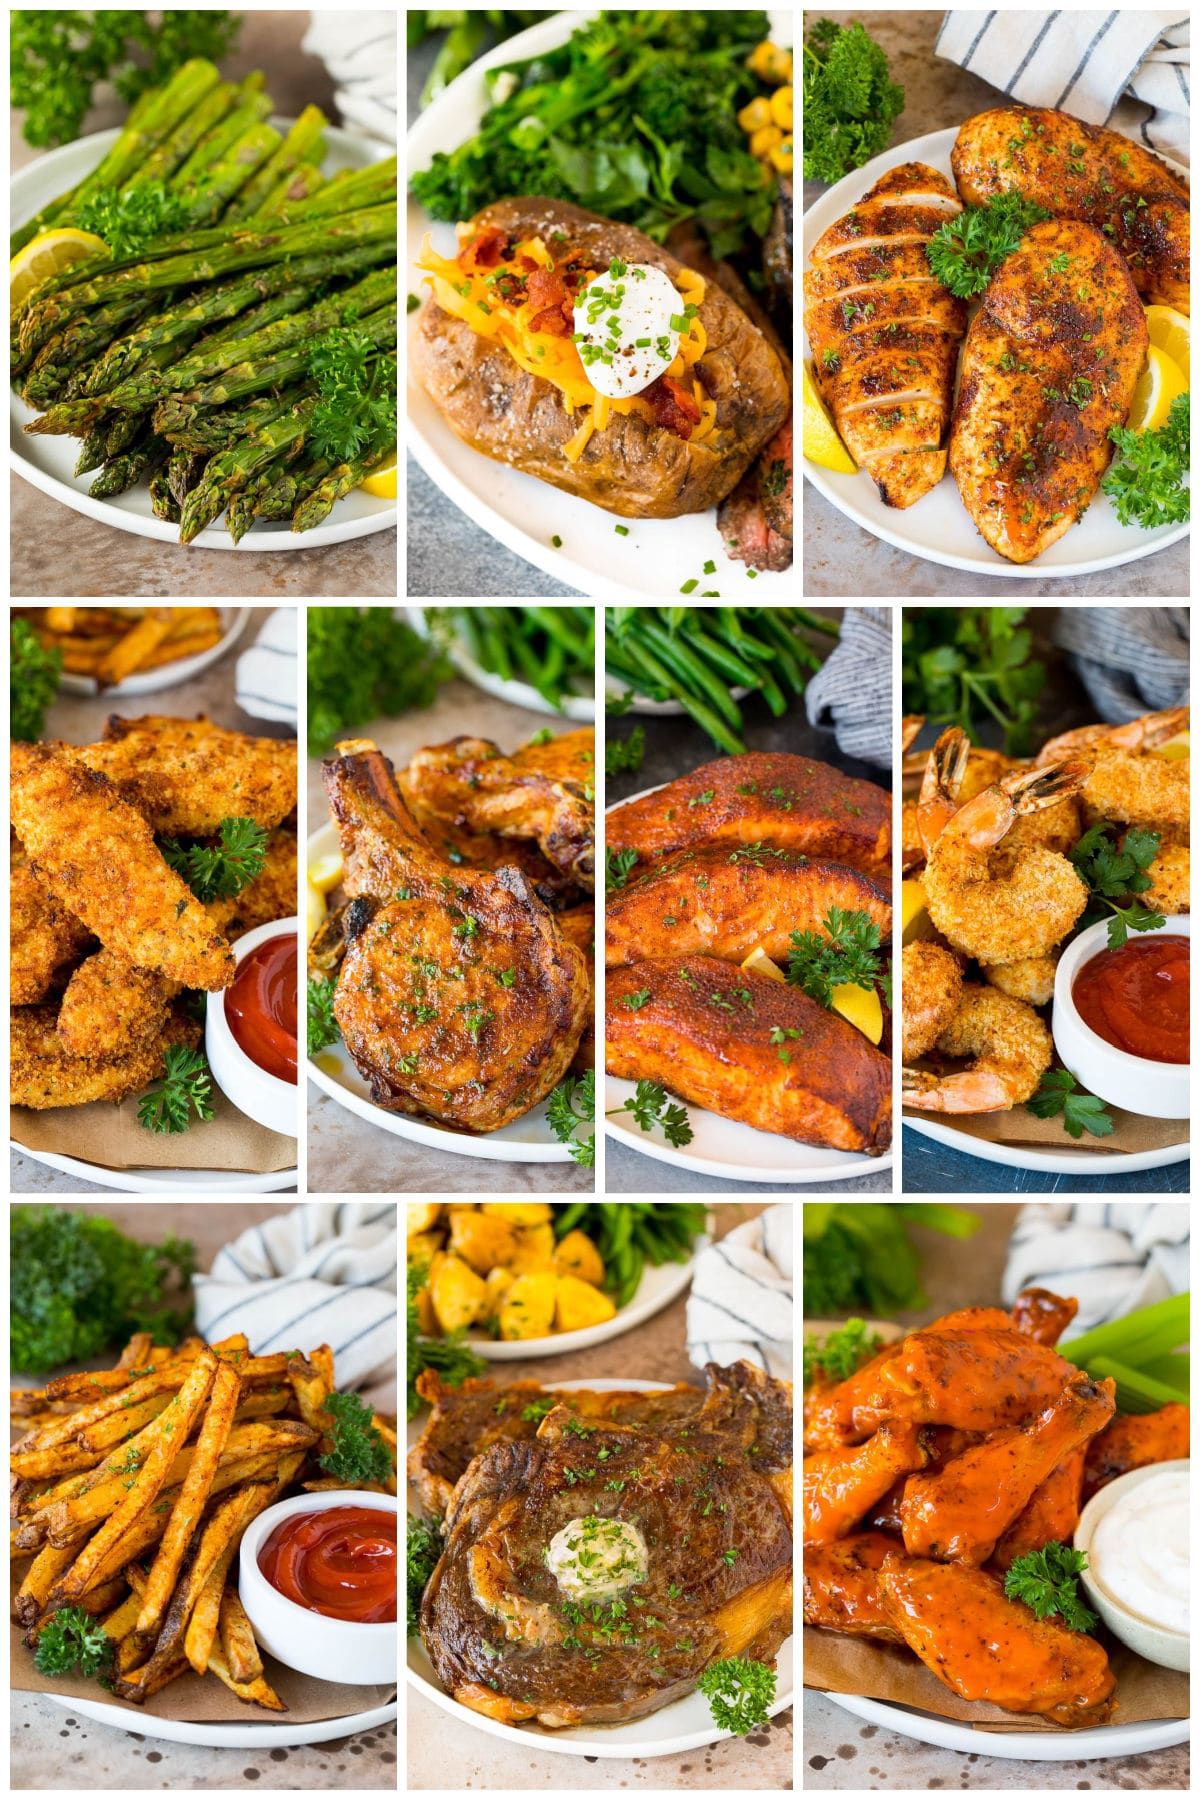 A collection of dishes that can be cooked up with an air fryer like chicken tenders, salmon and steak.